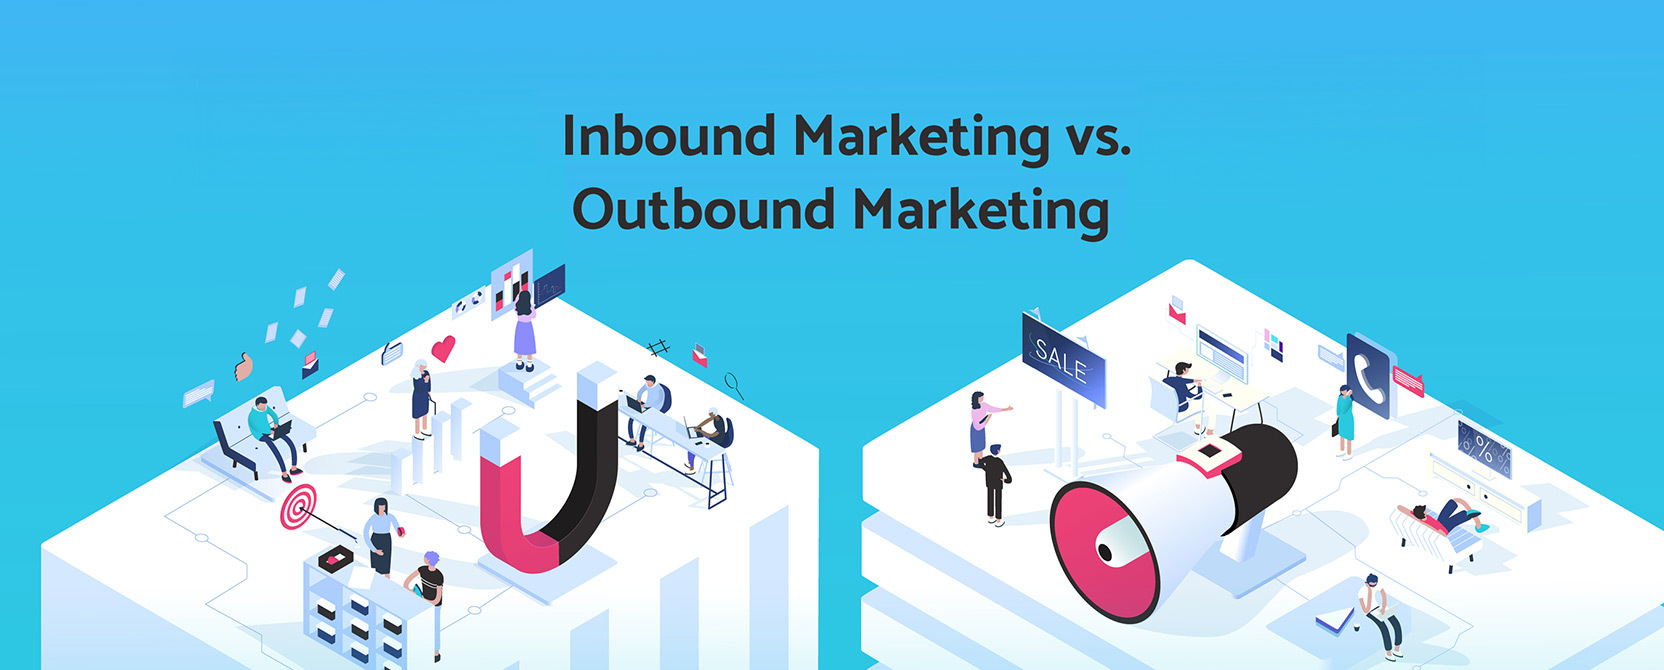 While outbound marketing still has its place, the future seems to tilt in favor of inbound strategies, especially for property management marketing.